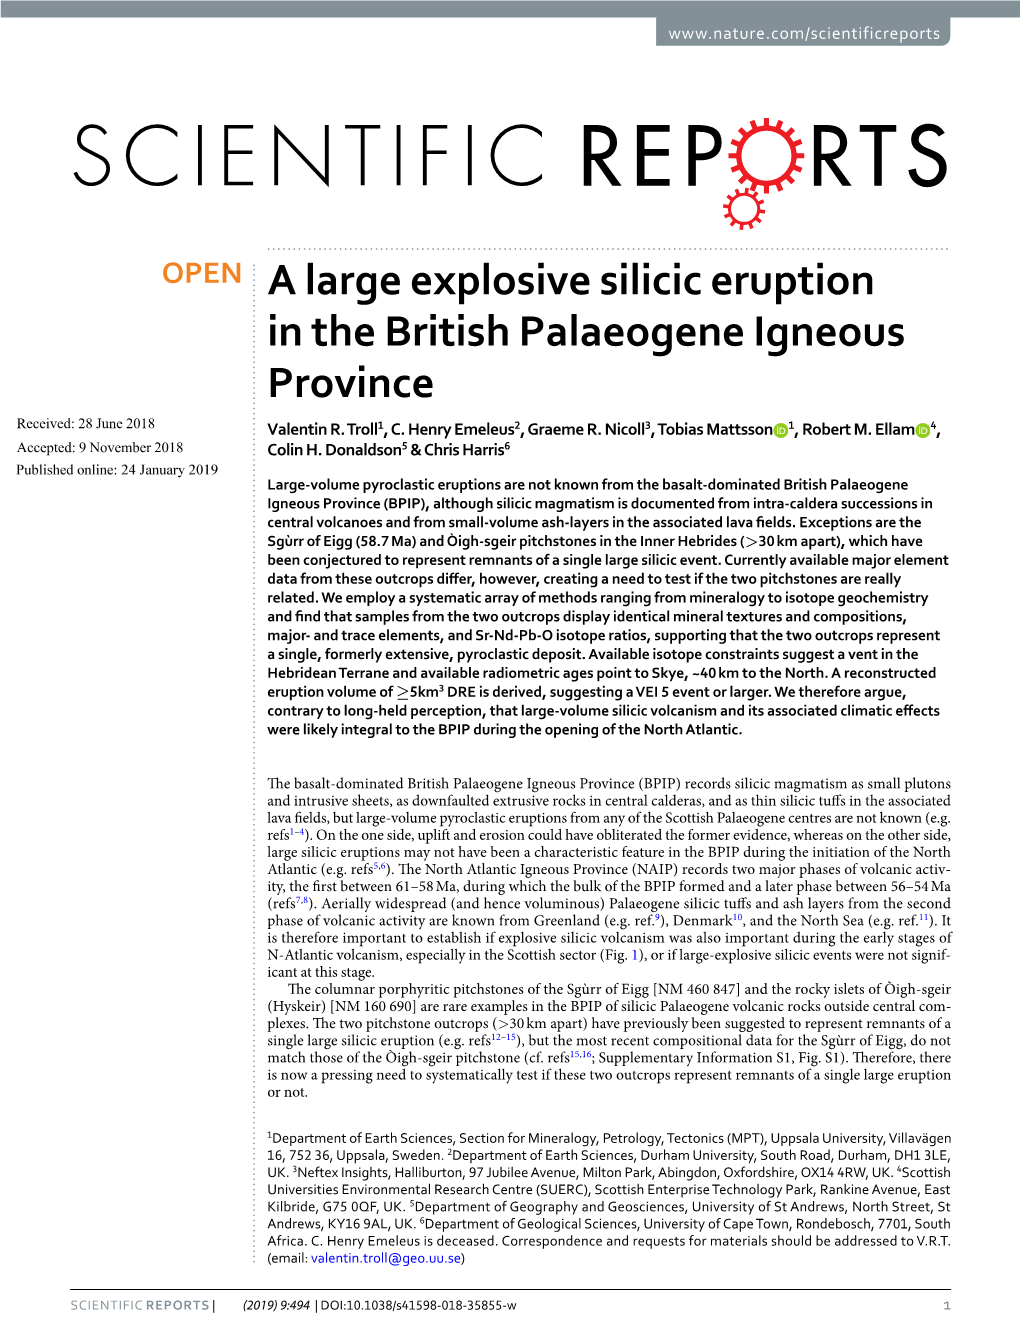 A Large Explosive Silicic Eruption in the British Palaeogene Igneous Province Received: 28 June 2018 Valentin R